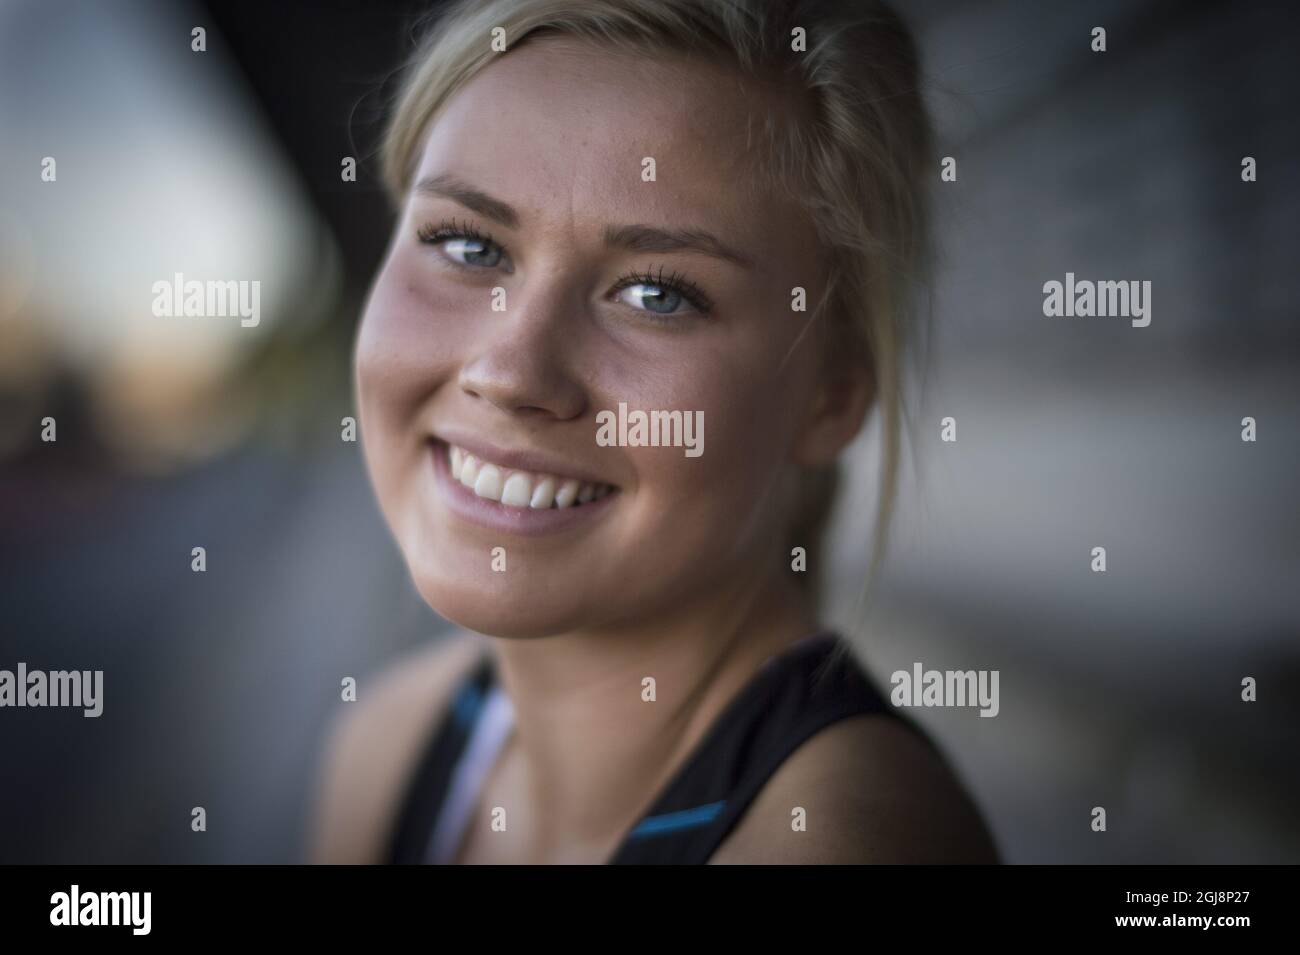 STOCKHOLM 2014-09-08 fotodate 2014-09-02 Bianca Salming is seen during her  decathlon practice with mon Katarina Pettersson and trainer Vlad Petrovic  in Stockholm. Sweden, September 8, 2014. Bianca is daughter of Borje Salming